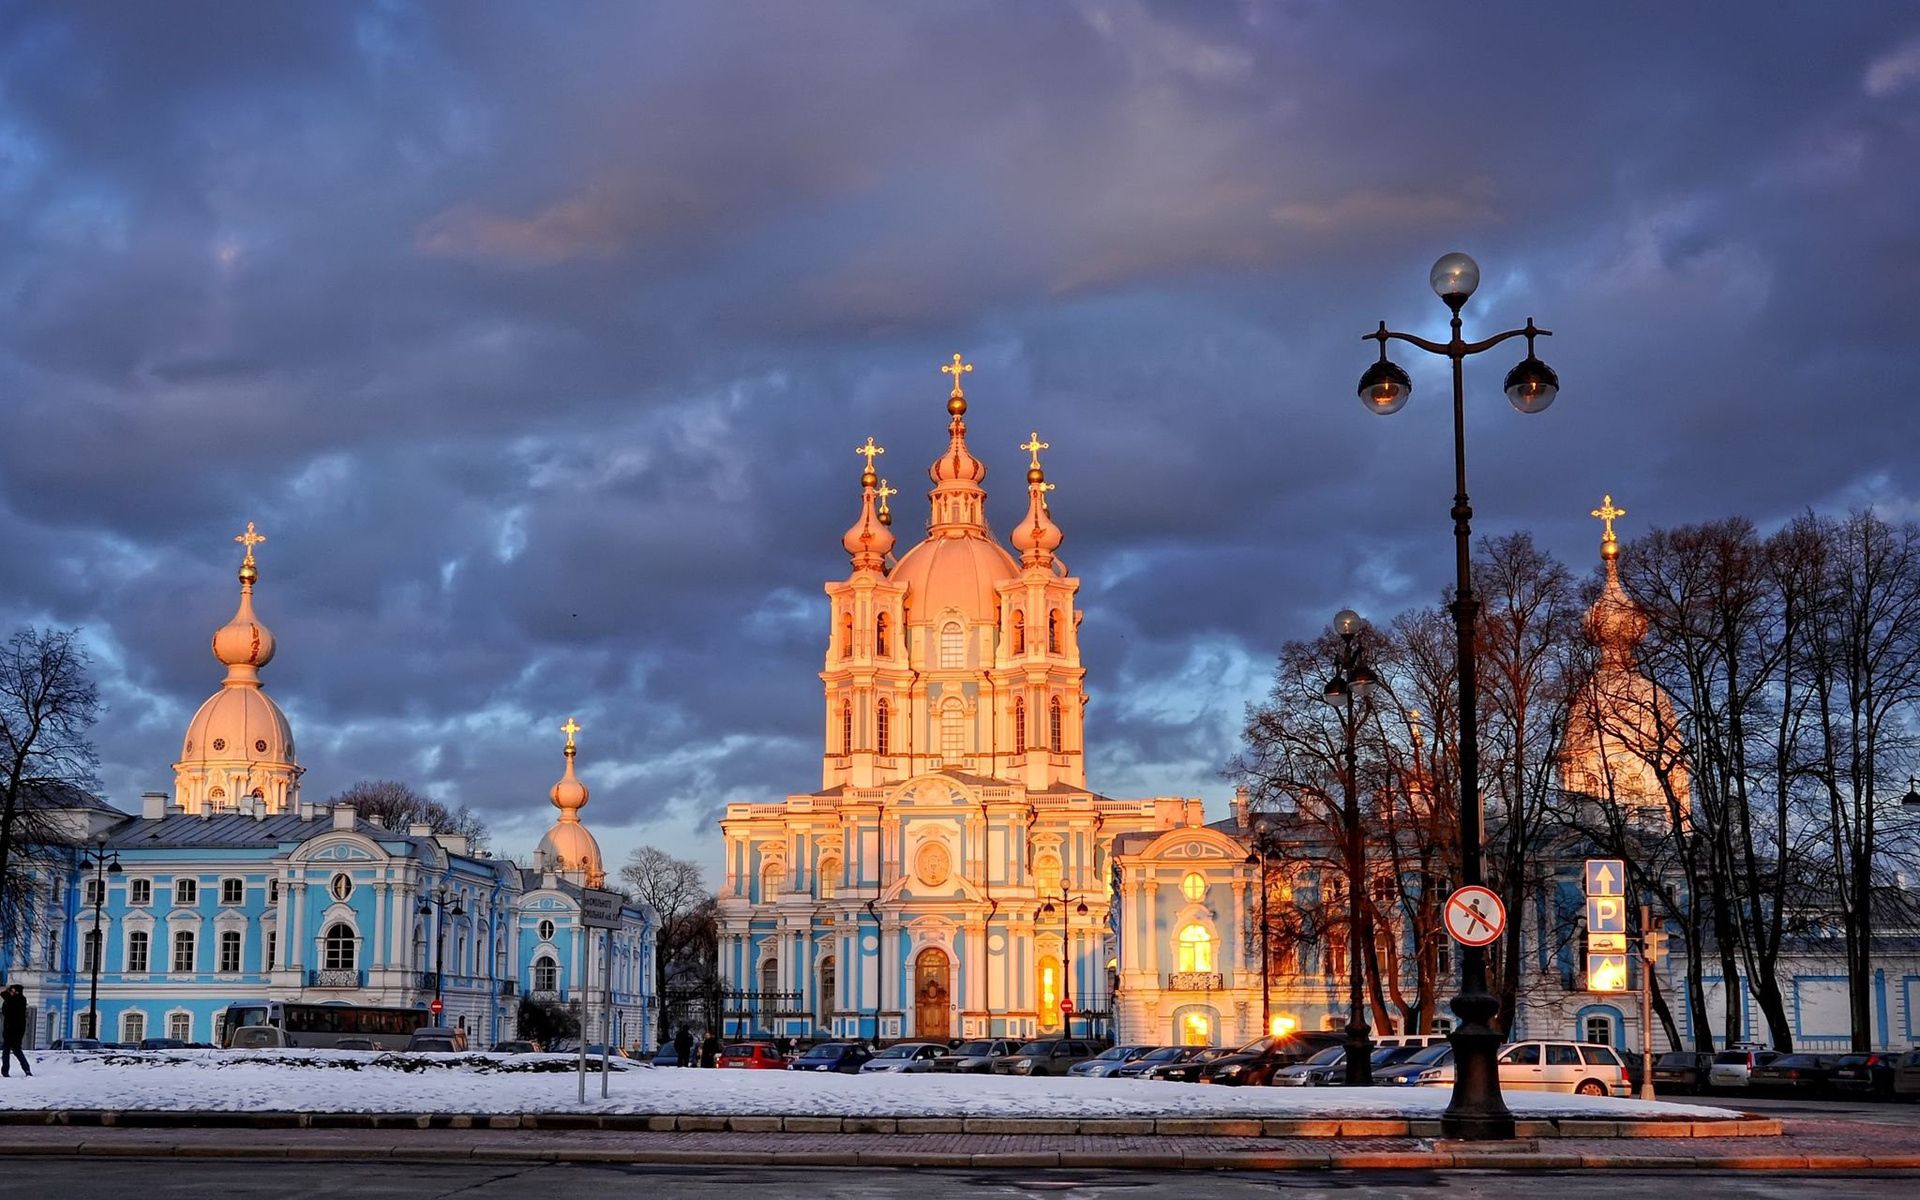 st petersburg, cities, trees, lamp, lantern, saint petersburg, smolny cathedral, resin cathedral